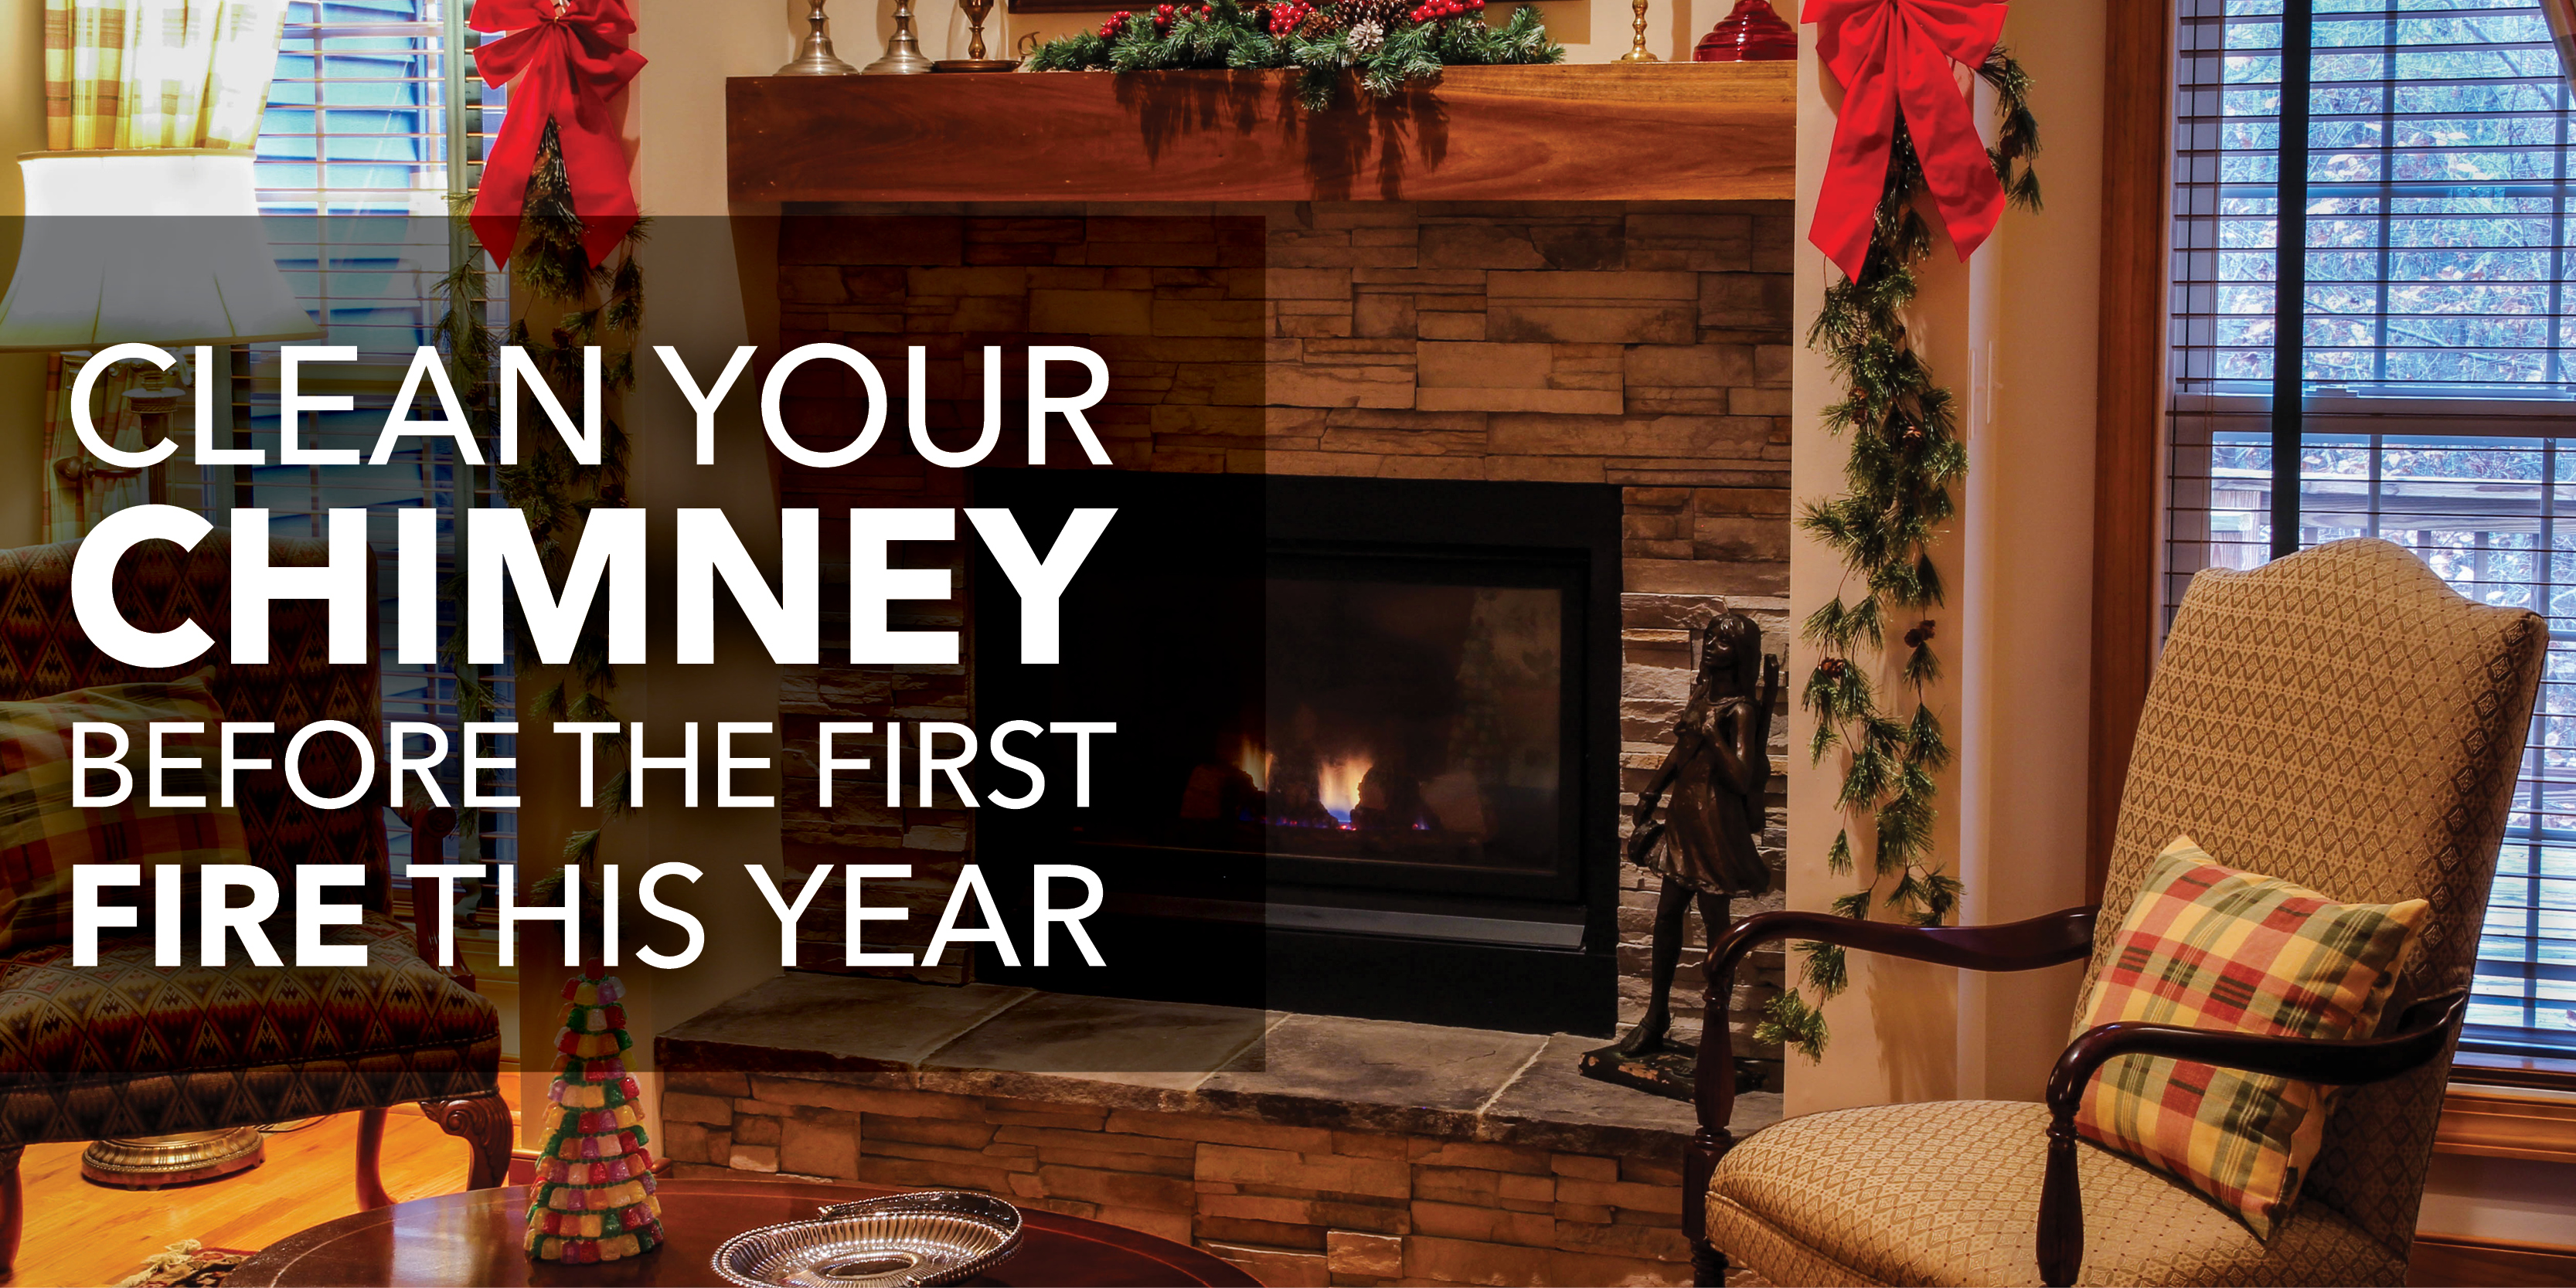 Cozy fireplace with text: "Clean your chimney before the first fire this year"